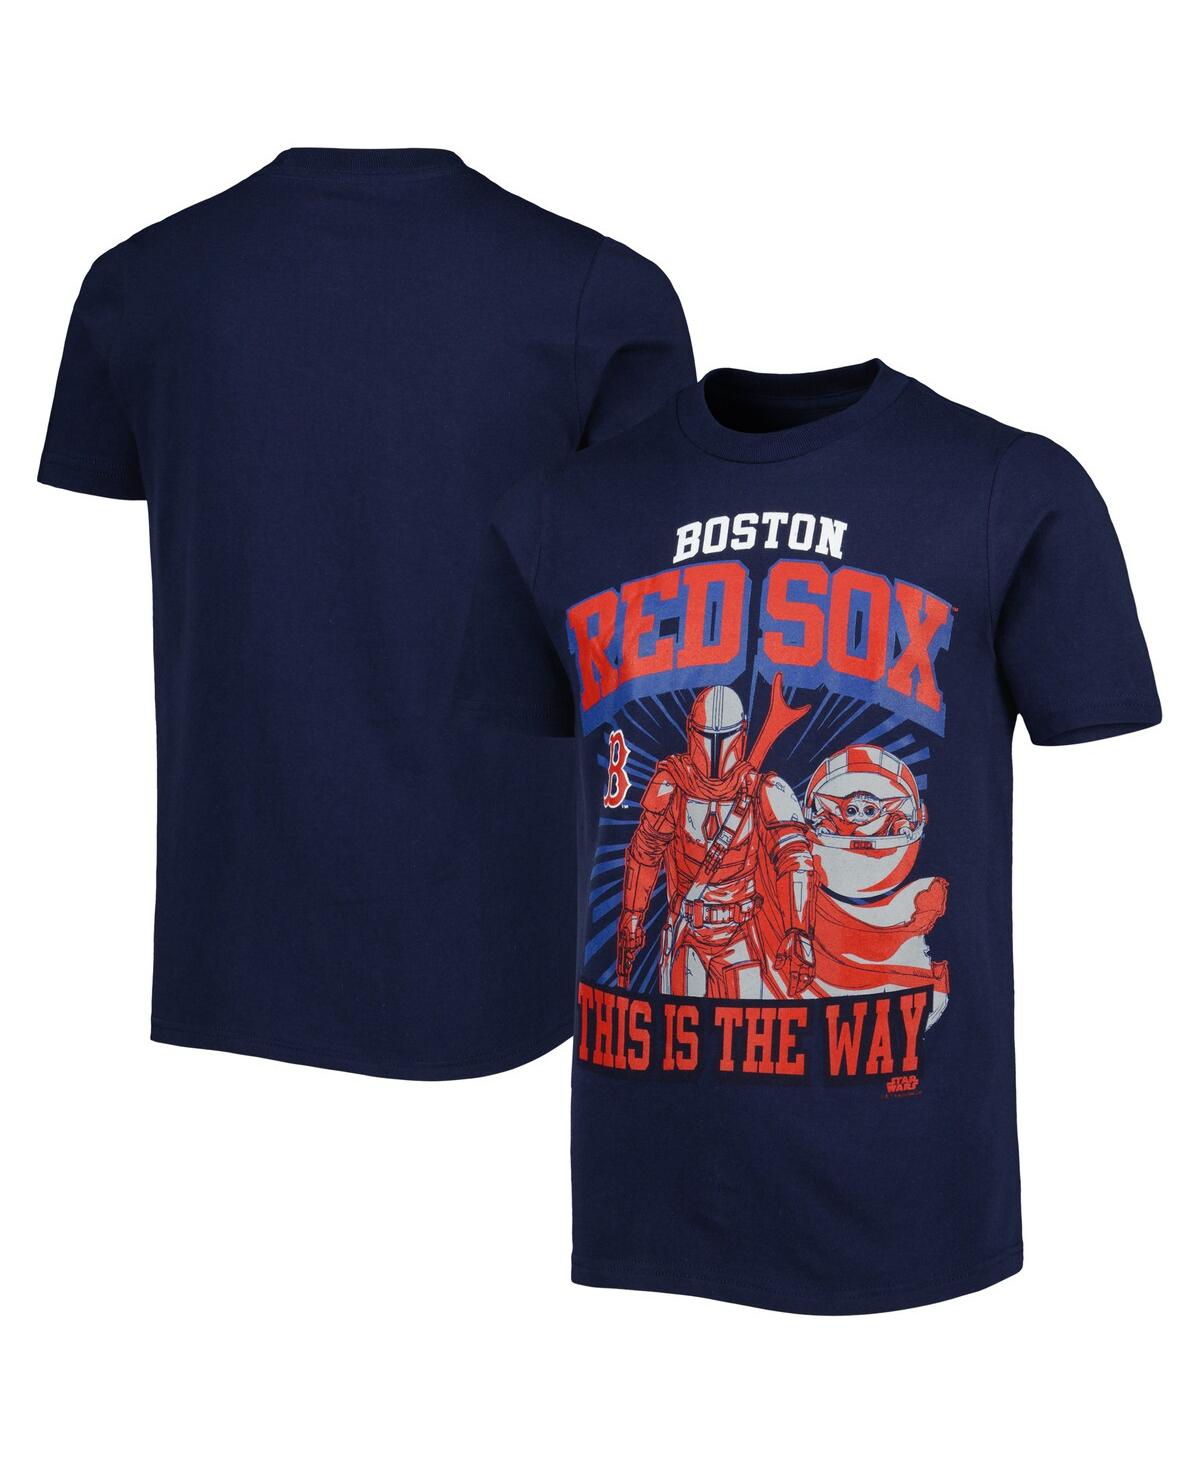 Outerstuff Kids' Big Boys And Girls Navy Boston Red Sox Star Wars This Is The Way T-shirt